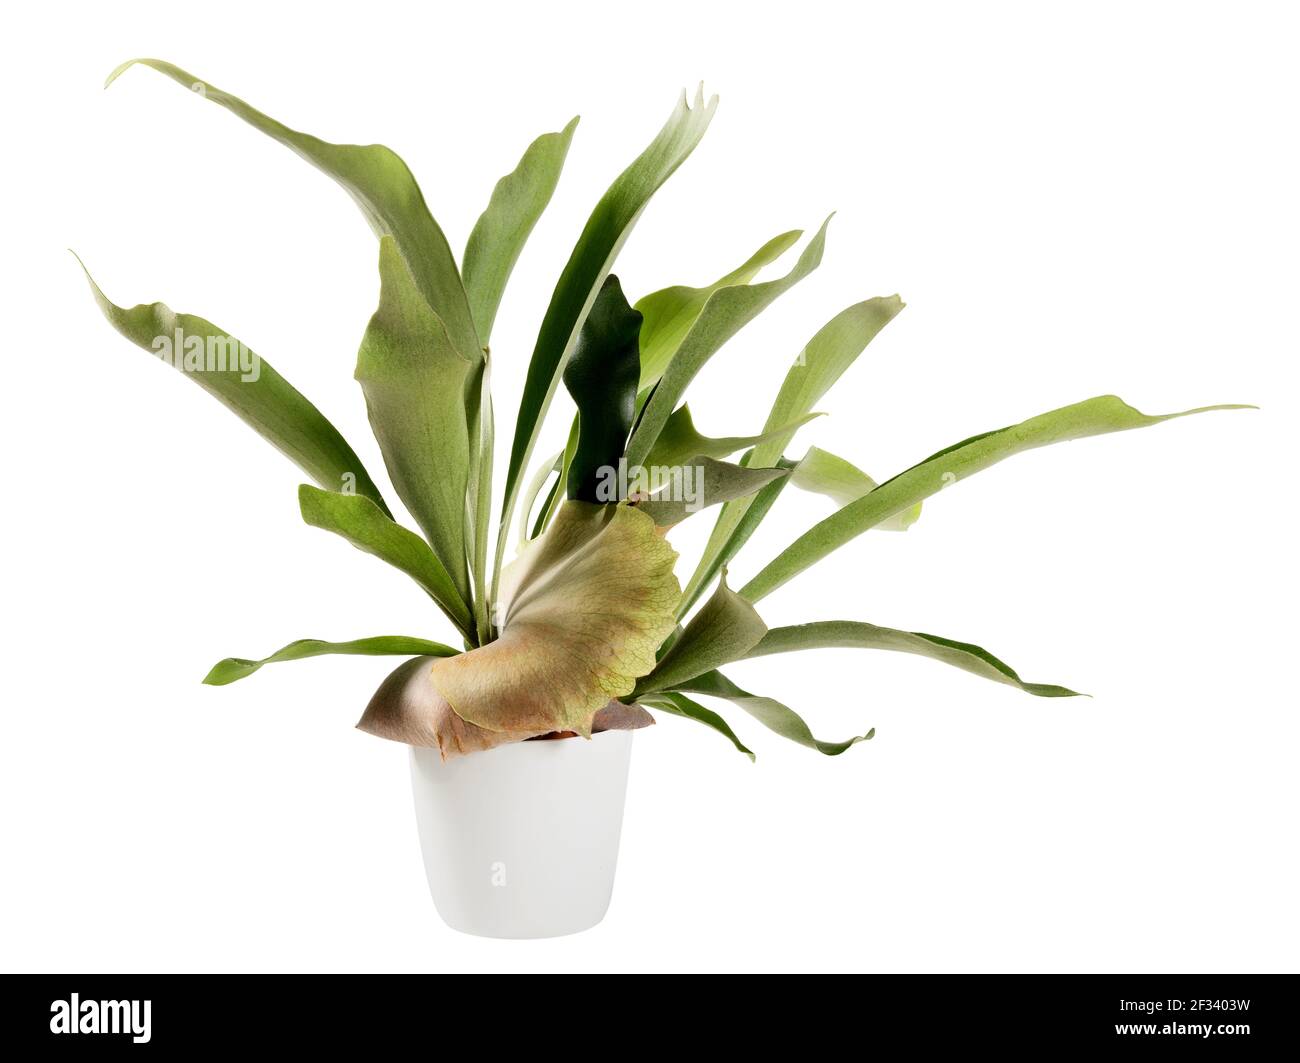 Distinctive flattened fronds of a potted Platycerium bifurcatum plant or ornamental Staghorn fern in a side view isolated on white with copyspace Stock Photo